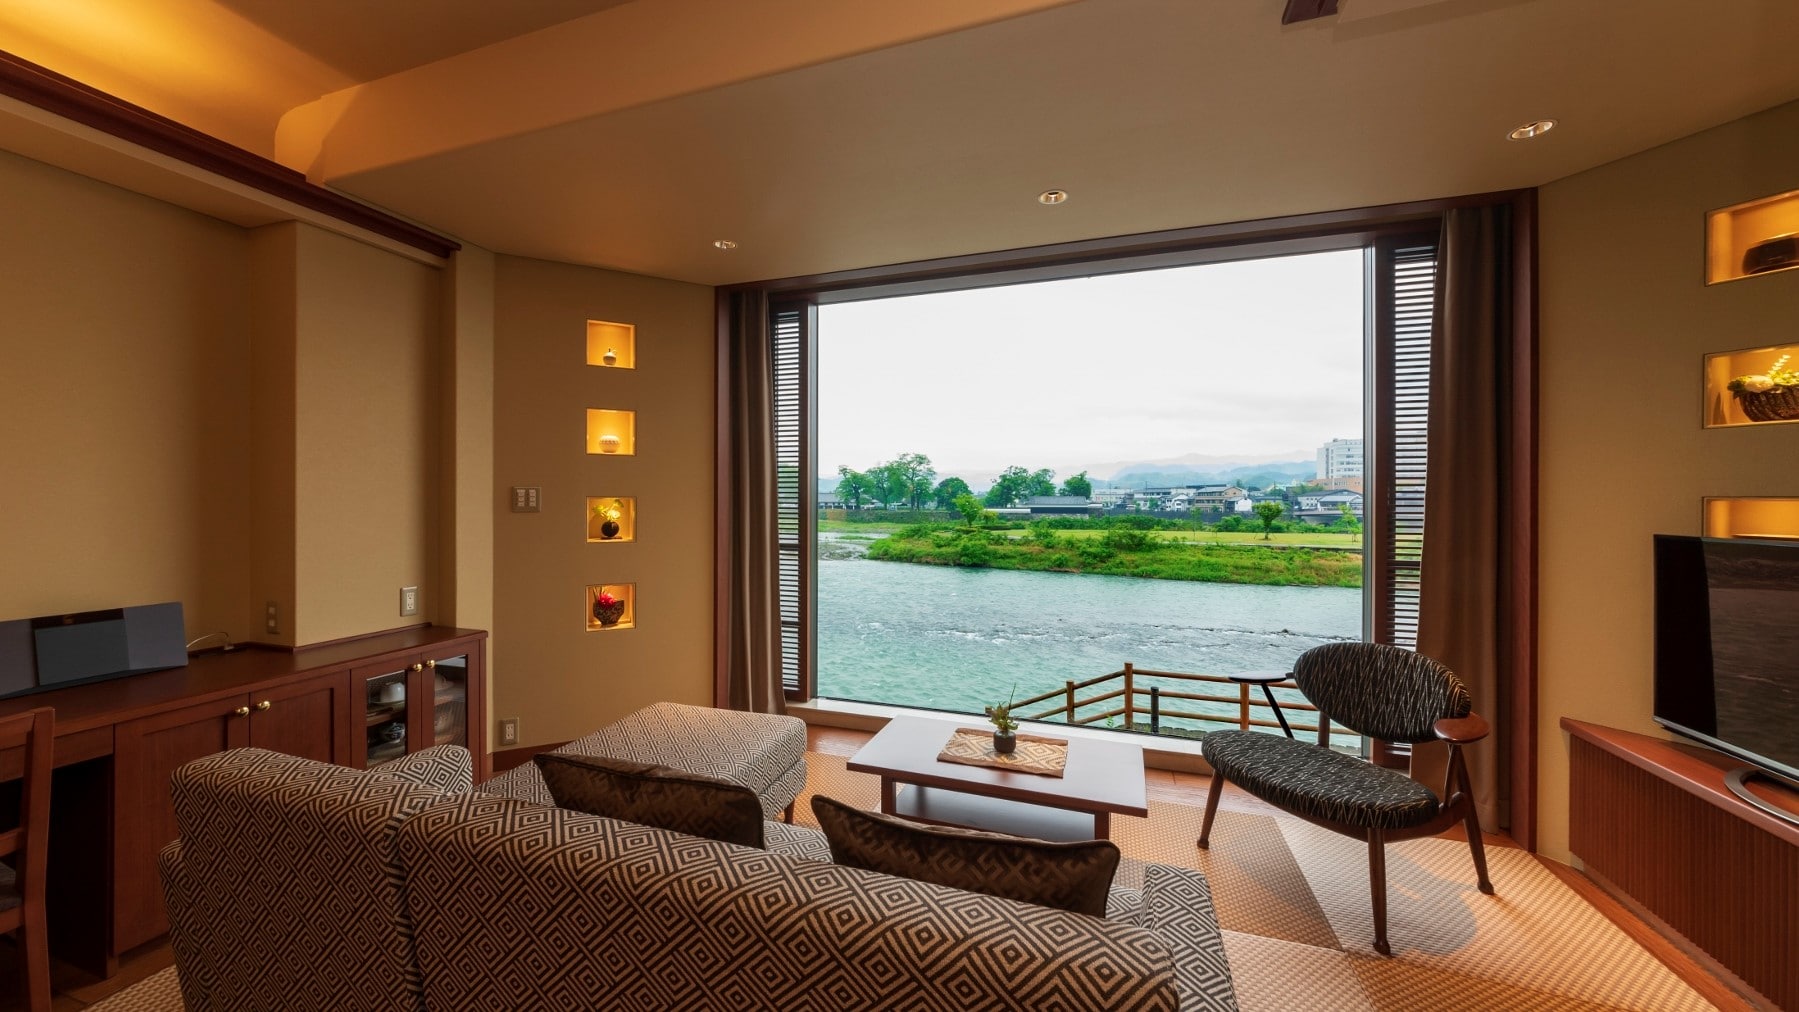 Japanese modern view premium room by the window overlooking the Kuma River